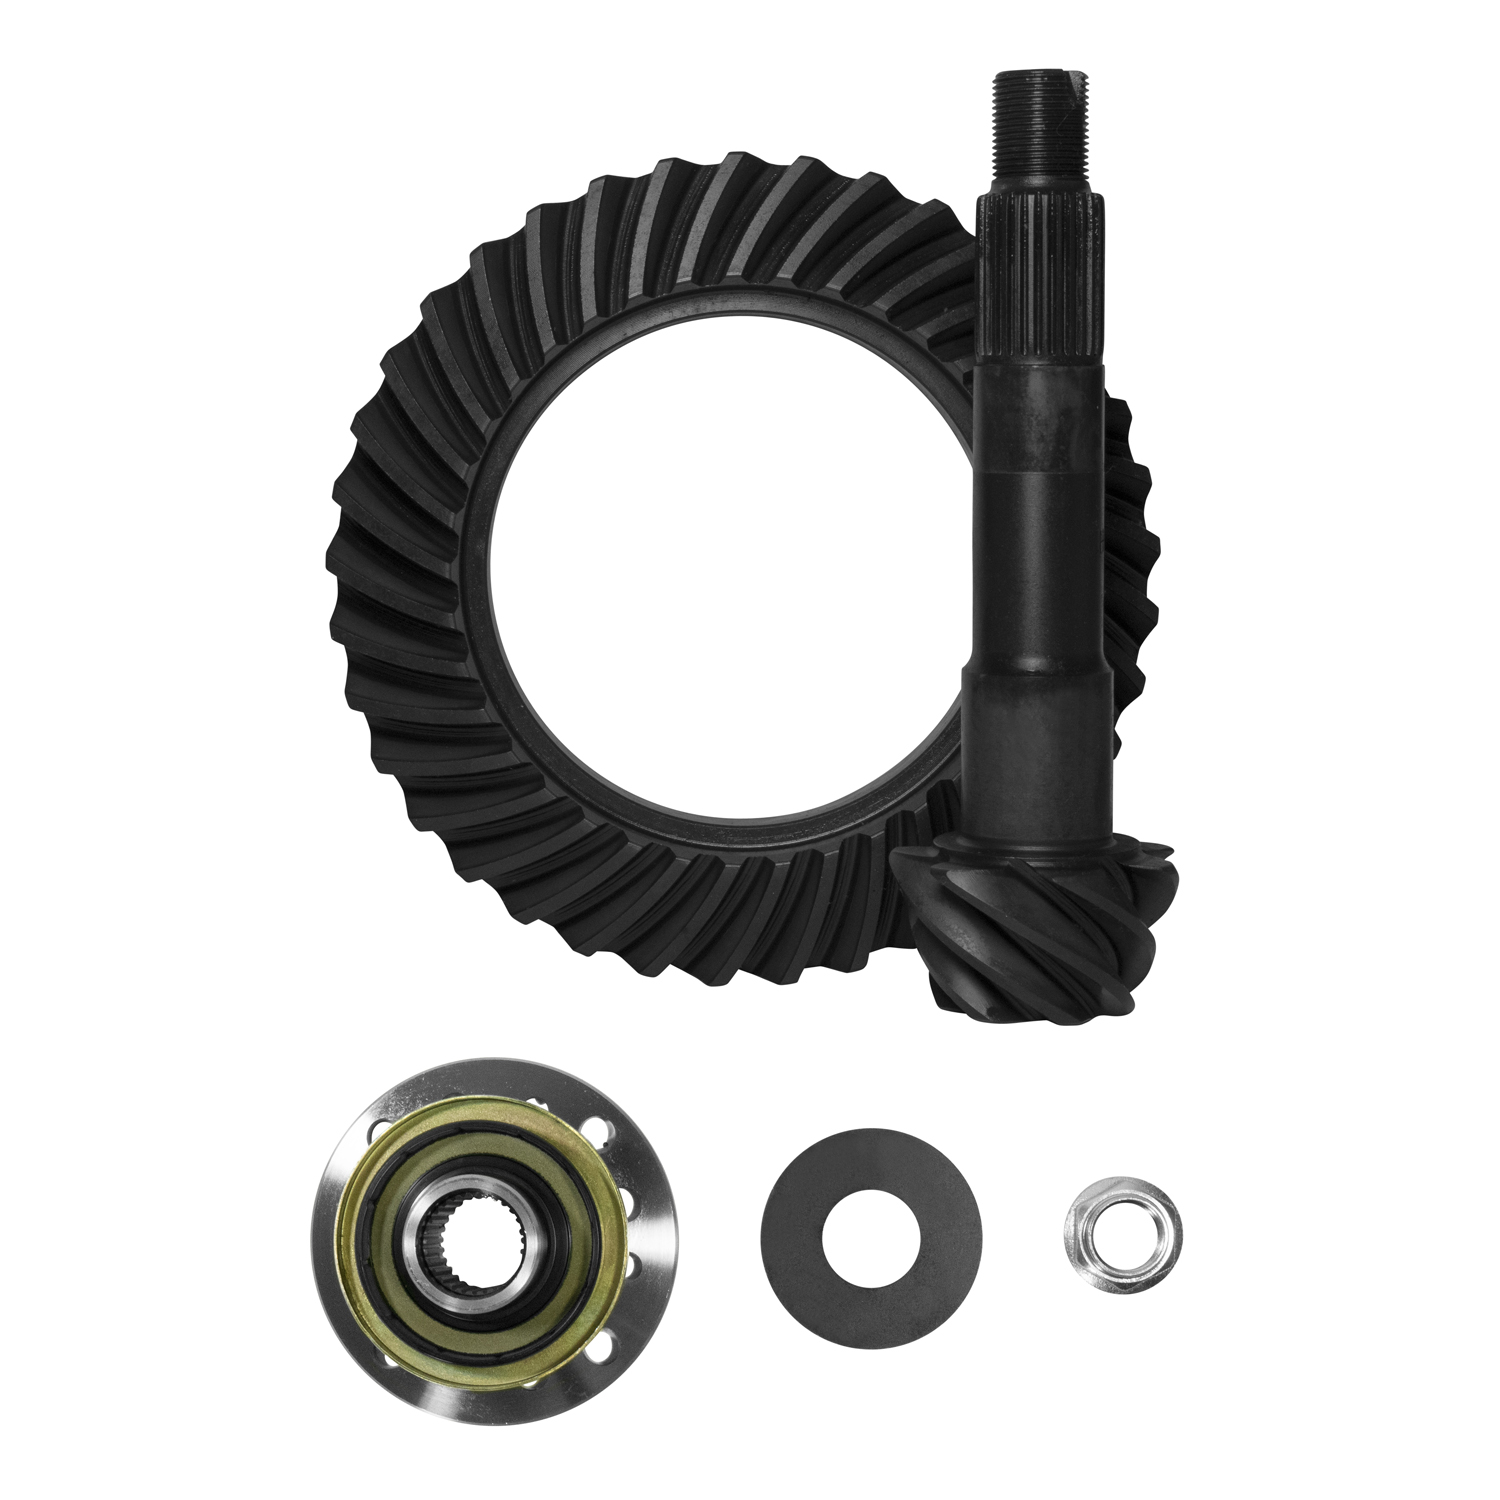 High performance Yukon Ring & Pinion gear set for Toyota 8" in a 3.90ratio 